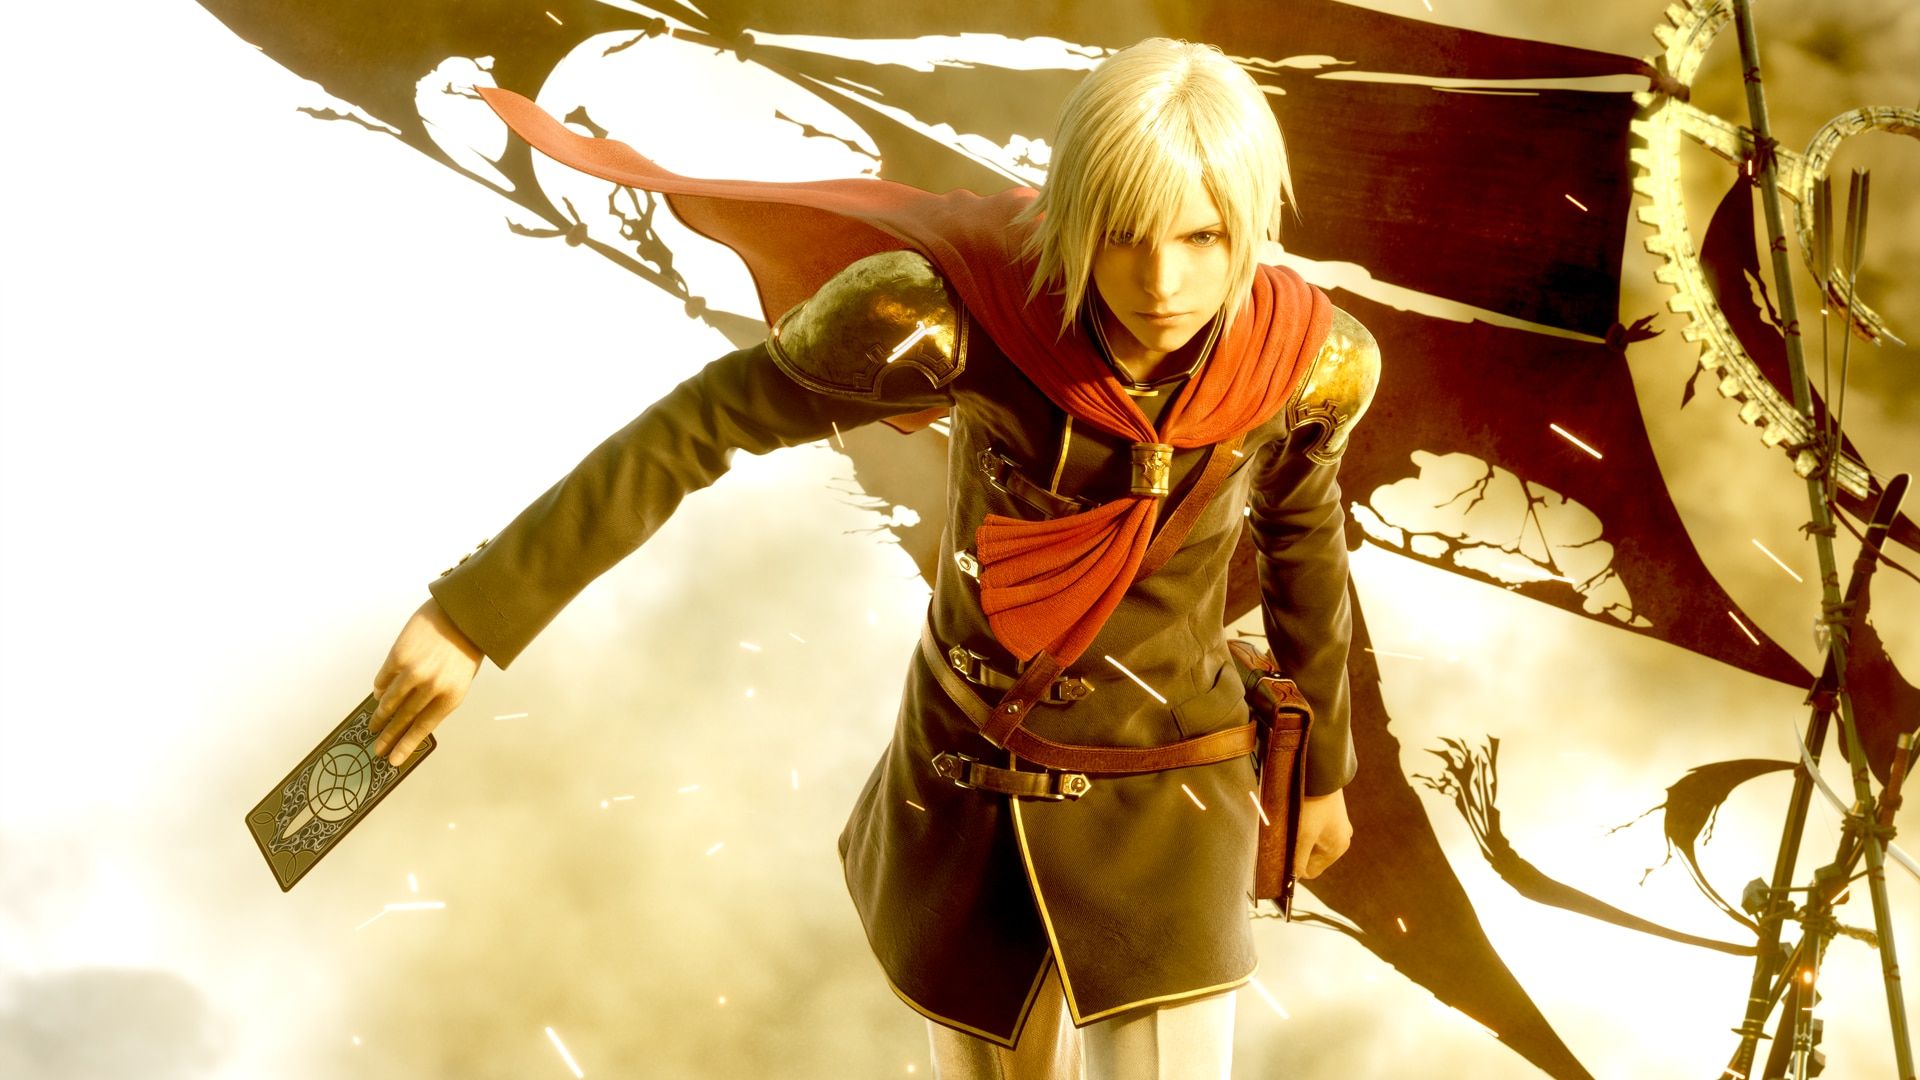 FINAL FANTASY TYPE-0 HD cover image